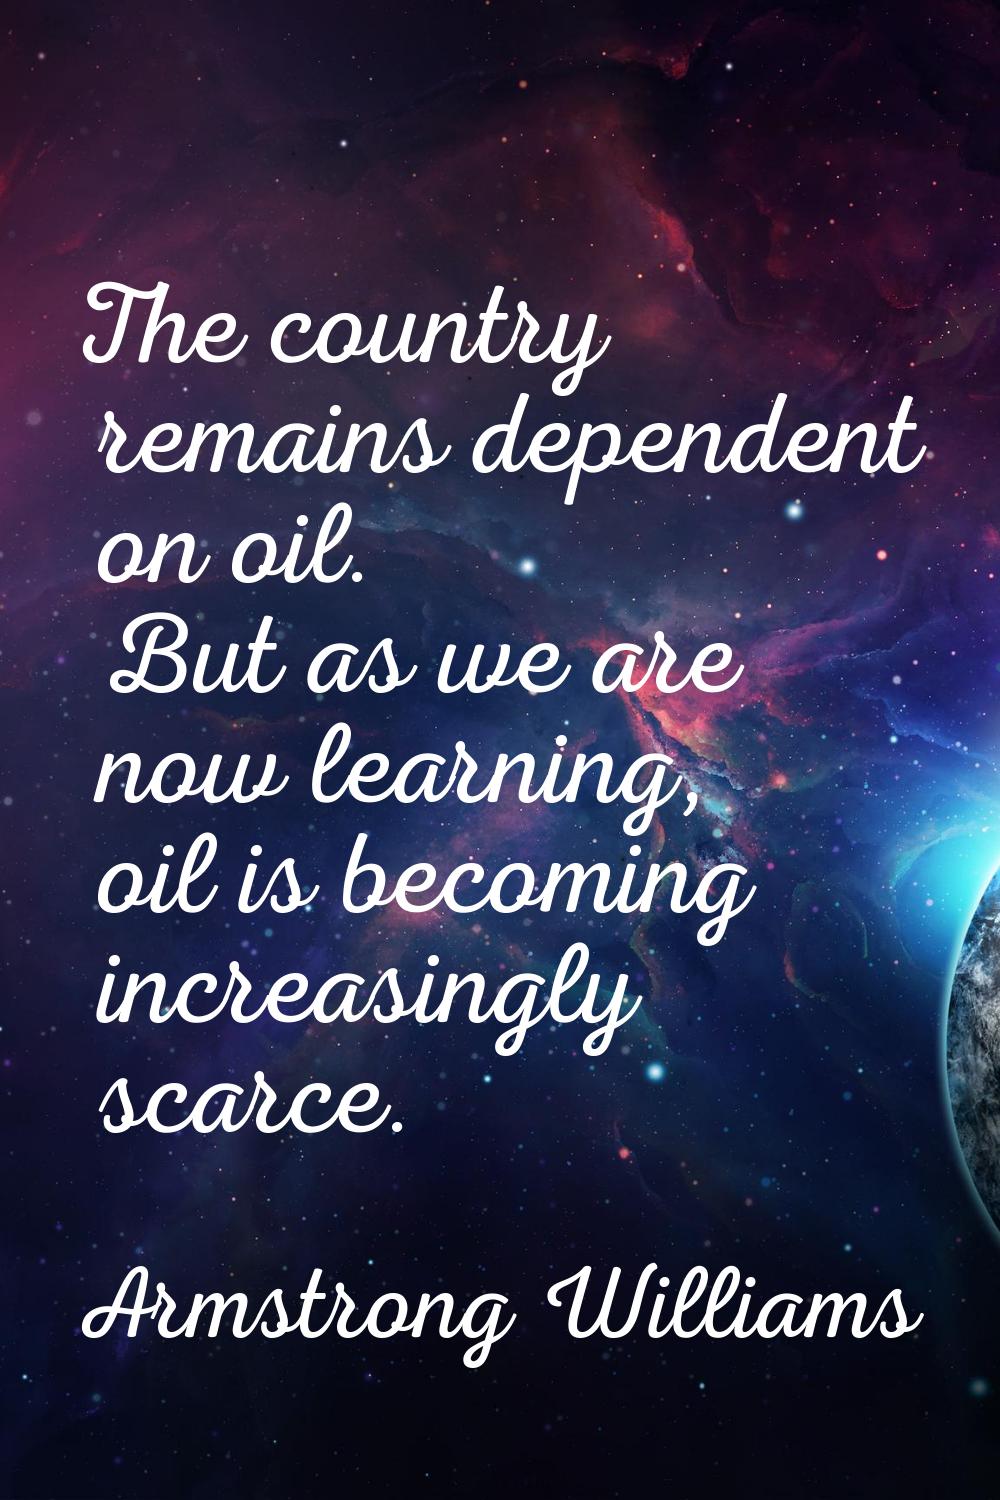 The country remains dependent on oil. But as we are now learning, oil is becoming increasingly scar